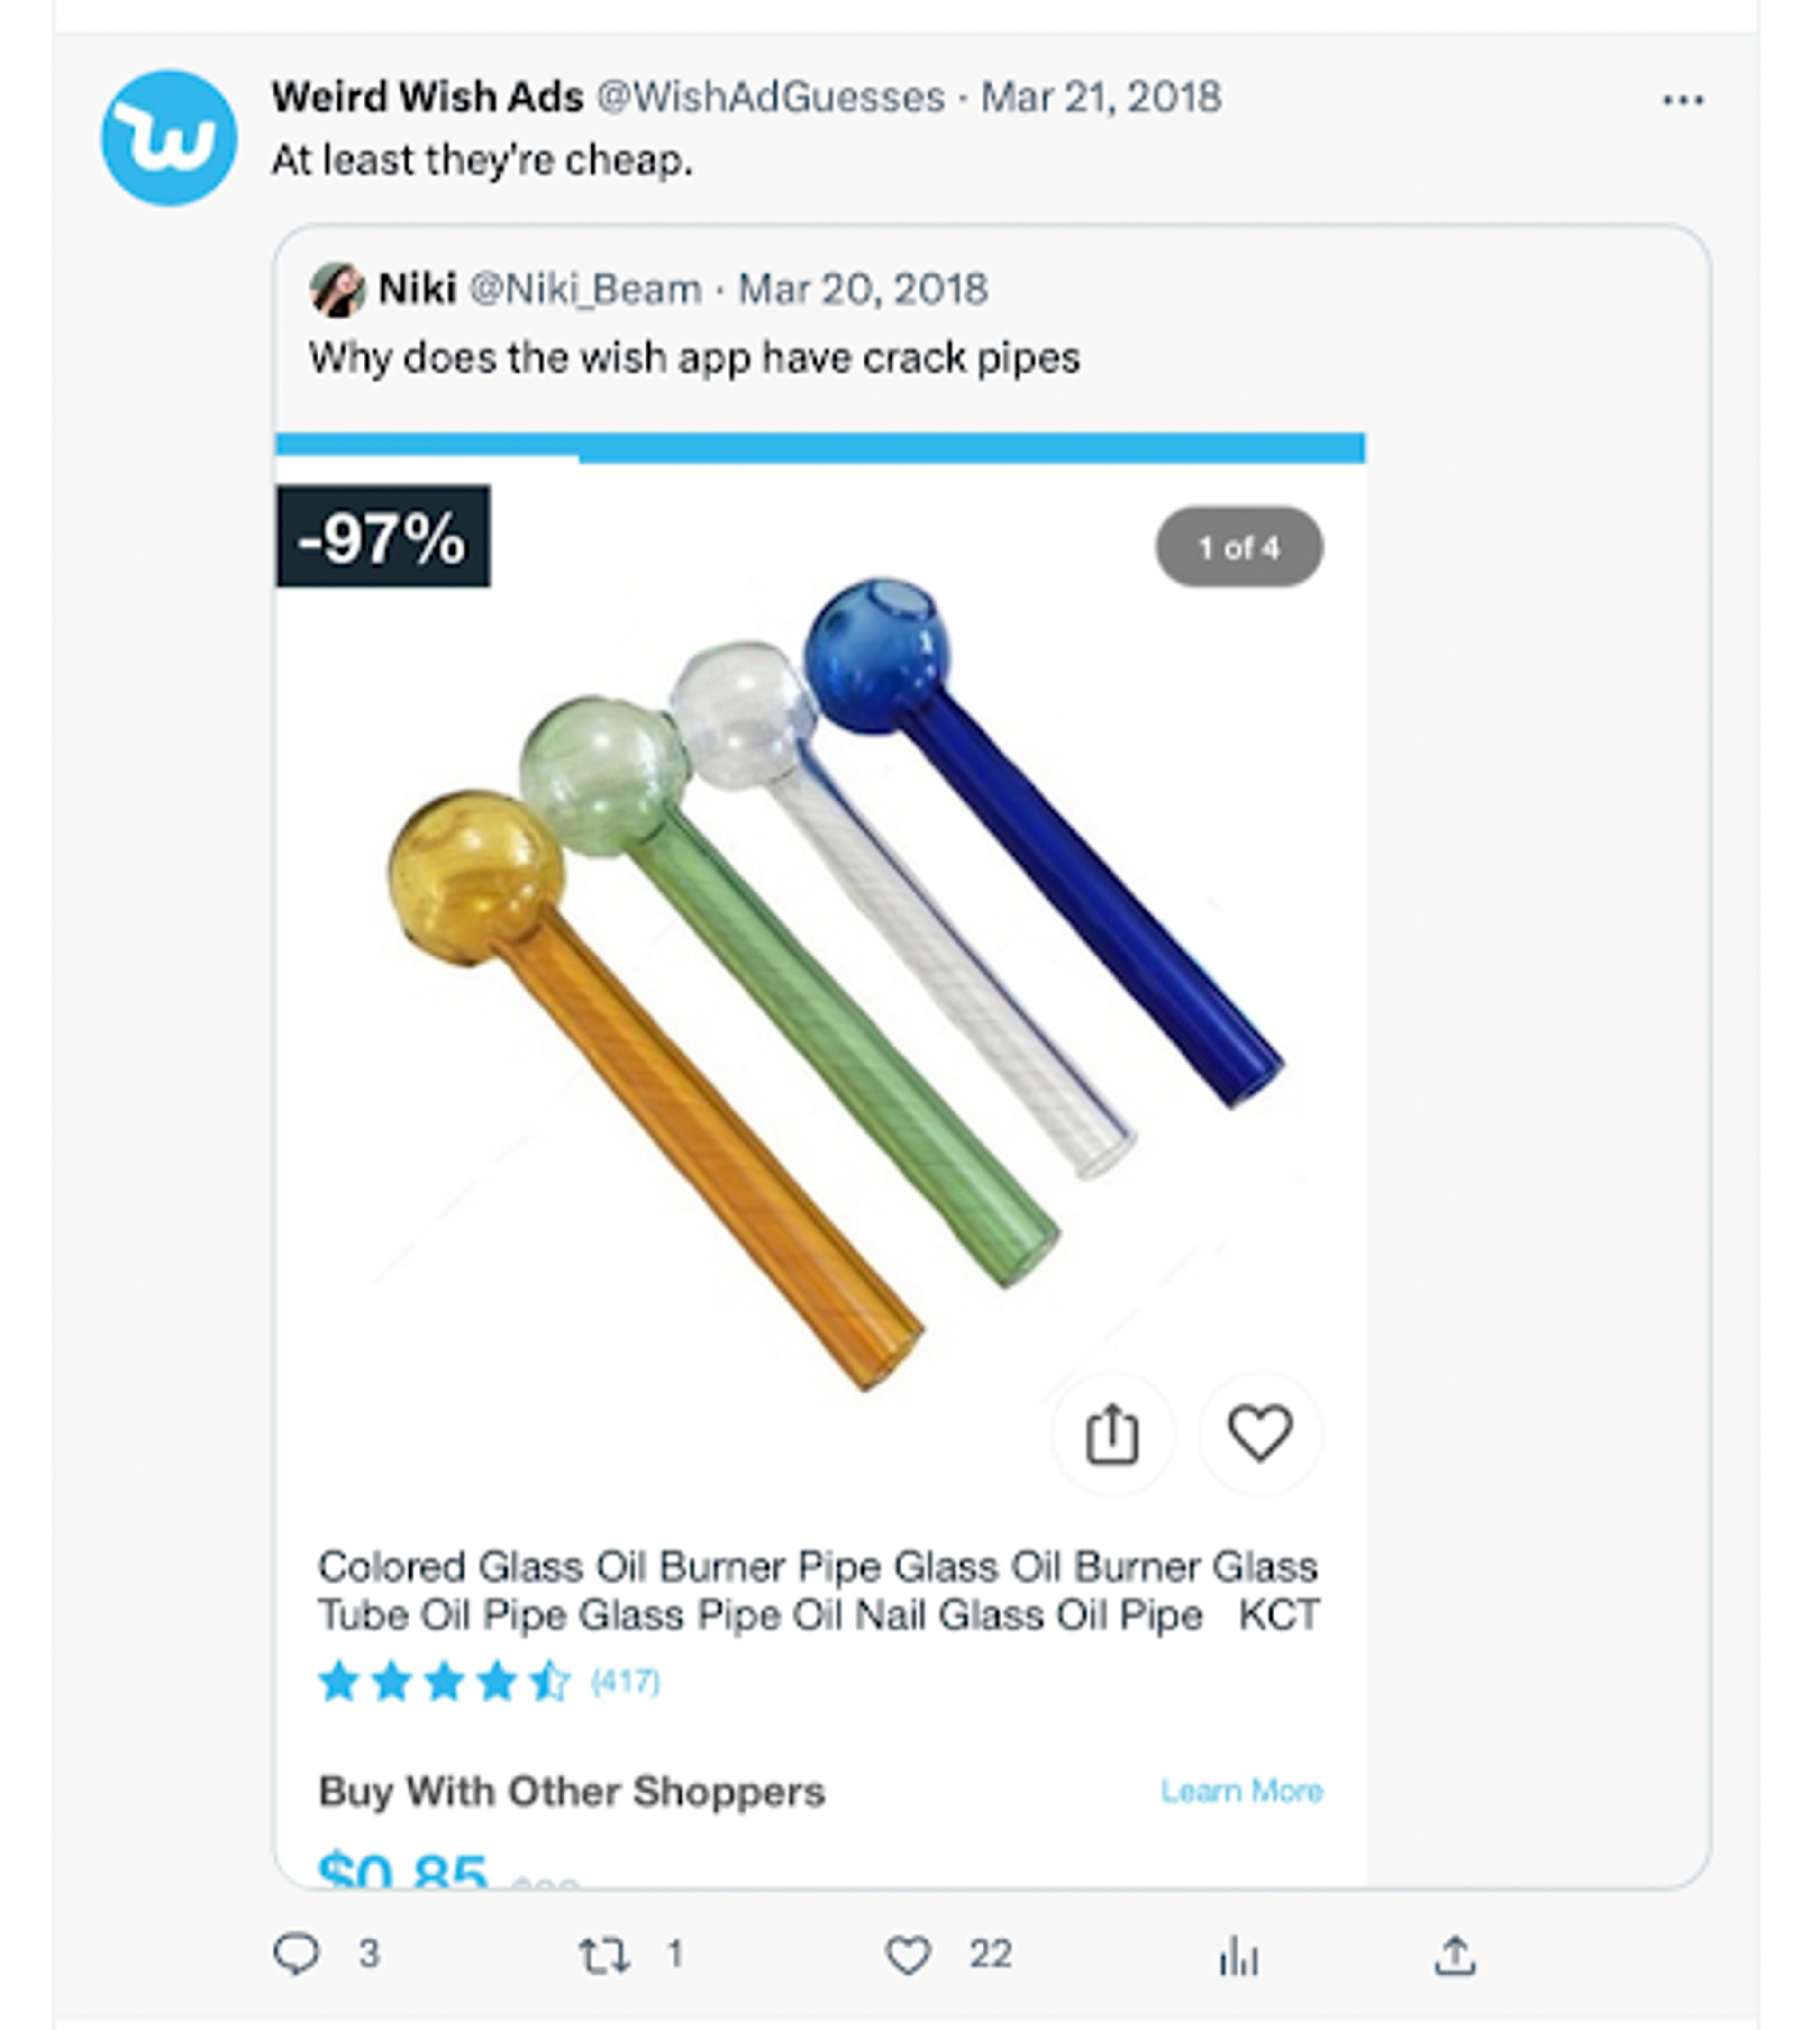 An example of a junk ad from the company wish. There's a set of 4 glass pipes that look rather suspicious. 